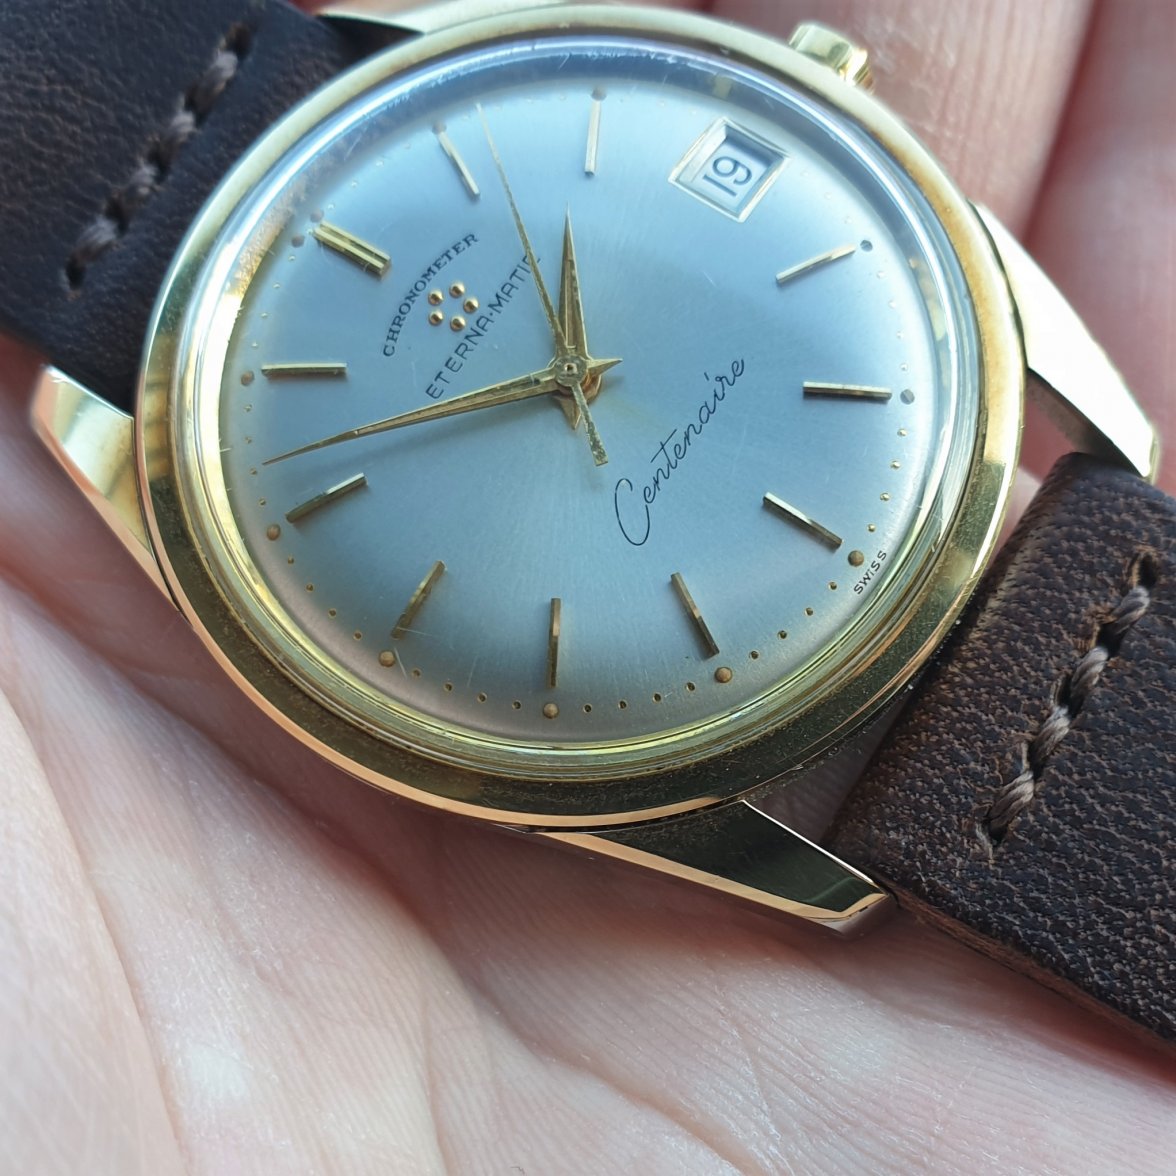 Eterna Matic | Page 28 | Omega Forums